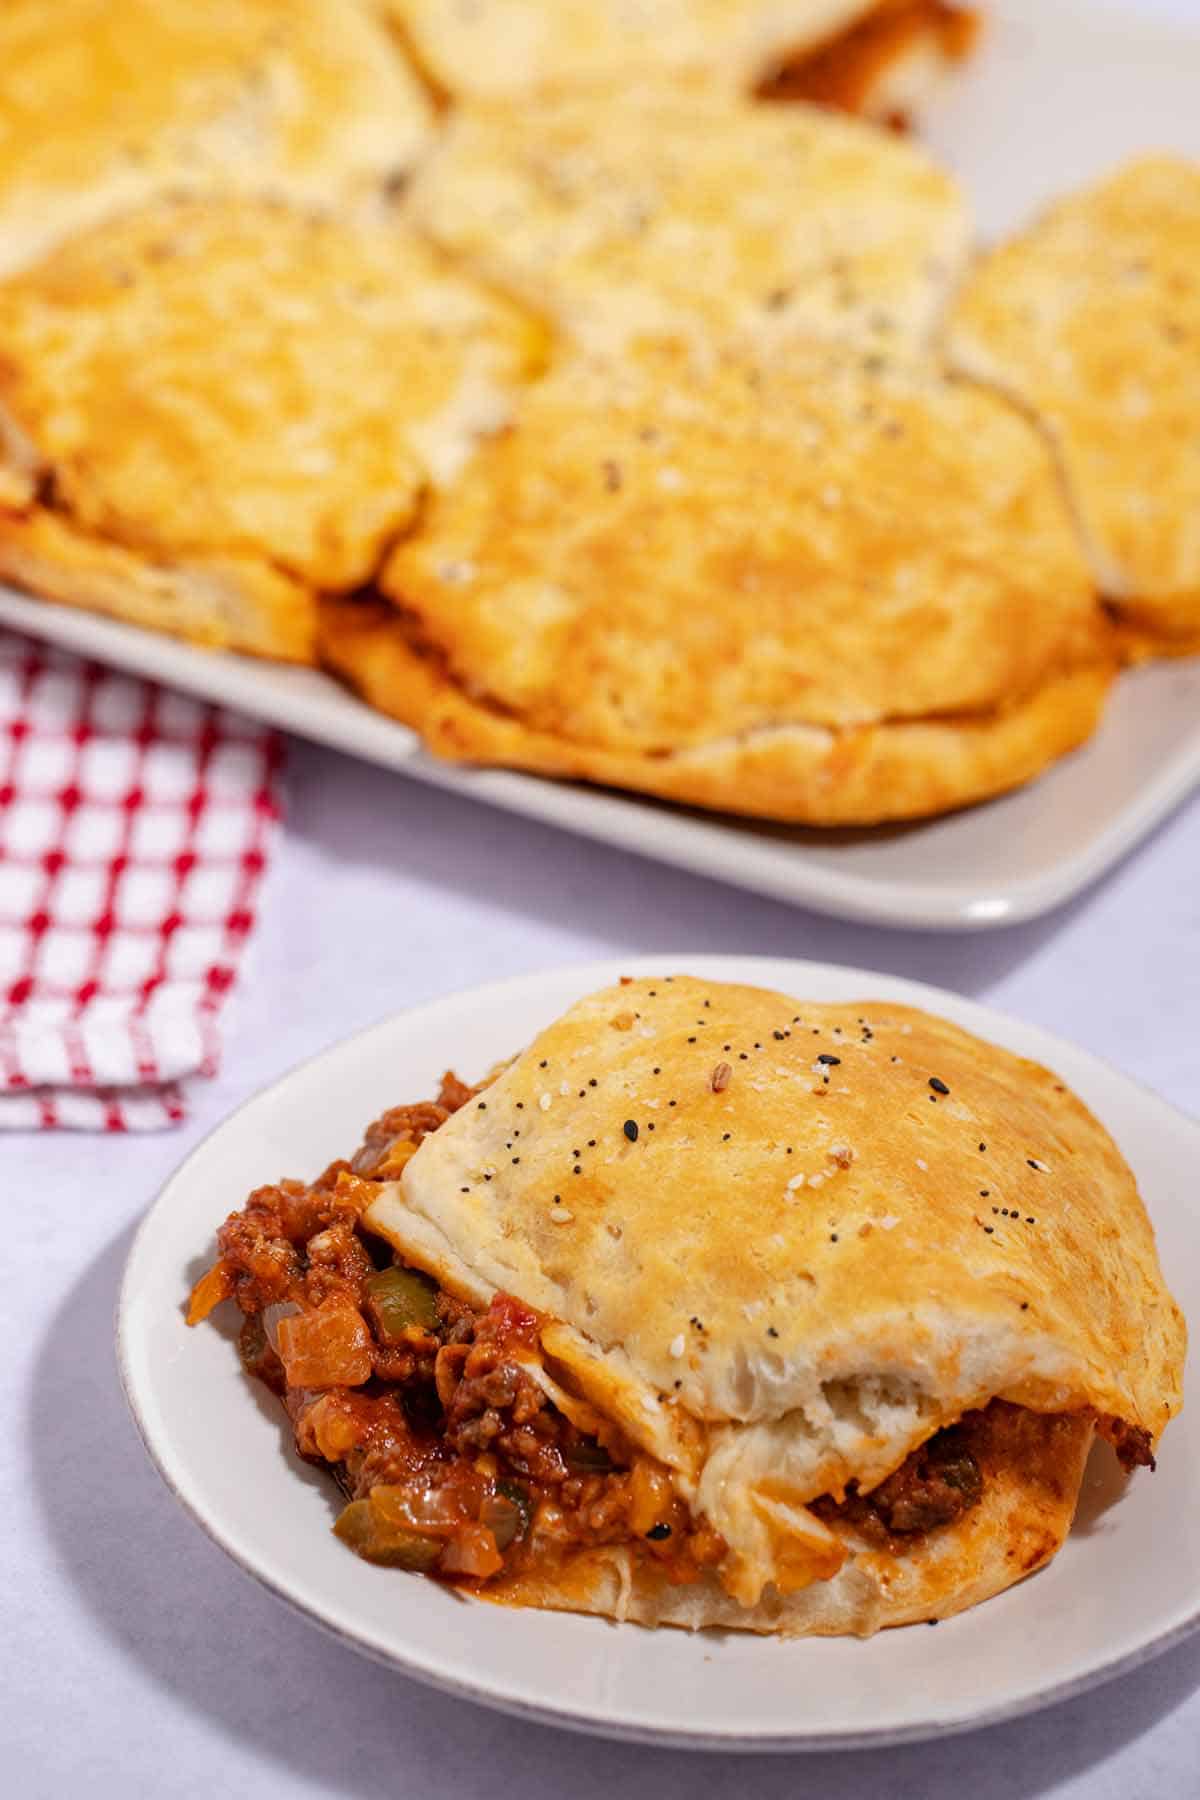 Plate of biscuit baked sloppy joes.